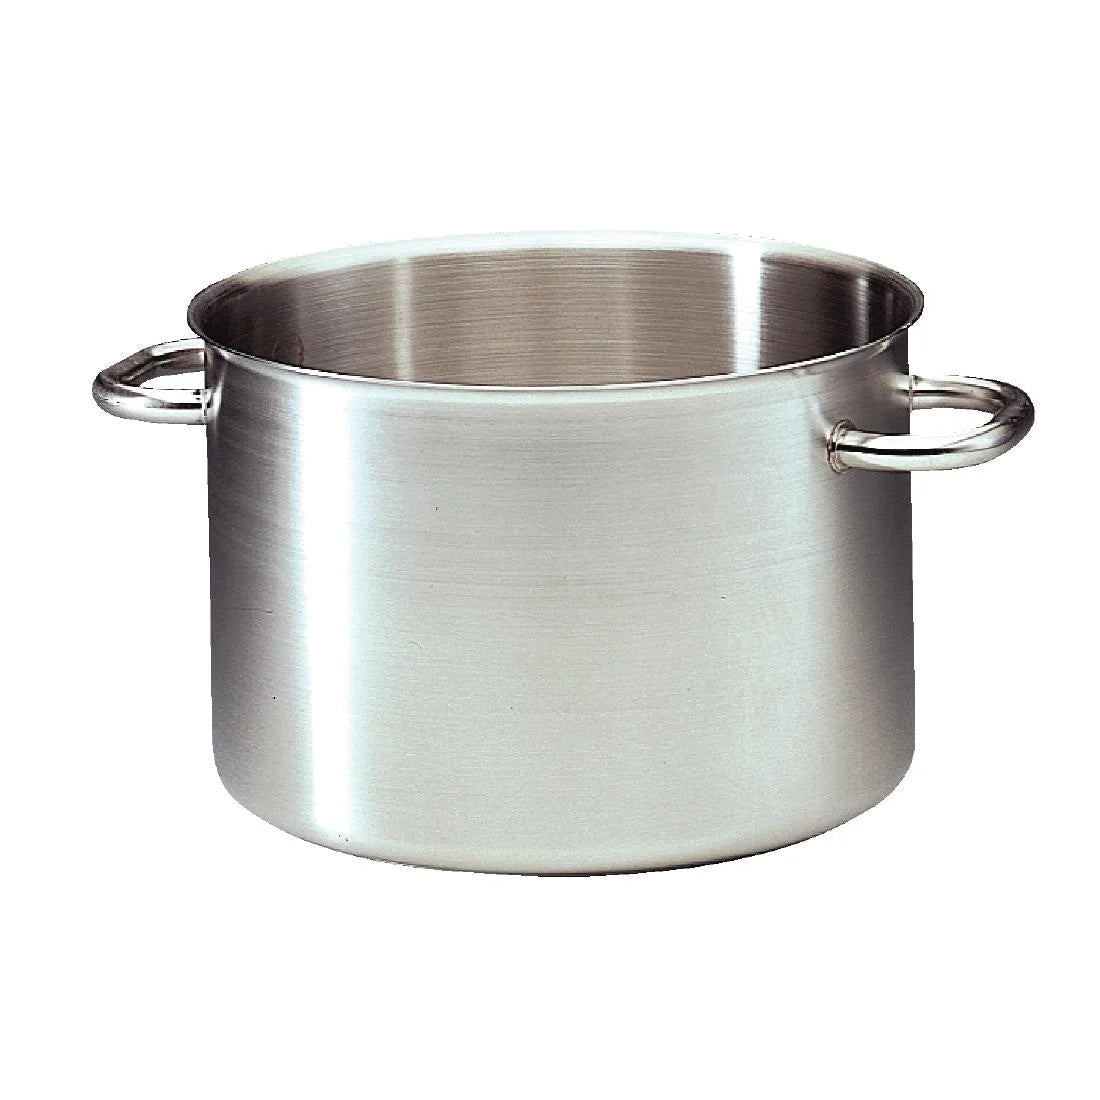 Bourgeat Excellence Boiling Pot 11ltr JD Catering Equipment Solutions Ltd